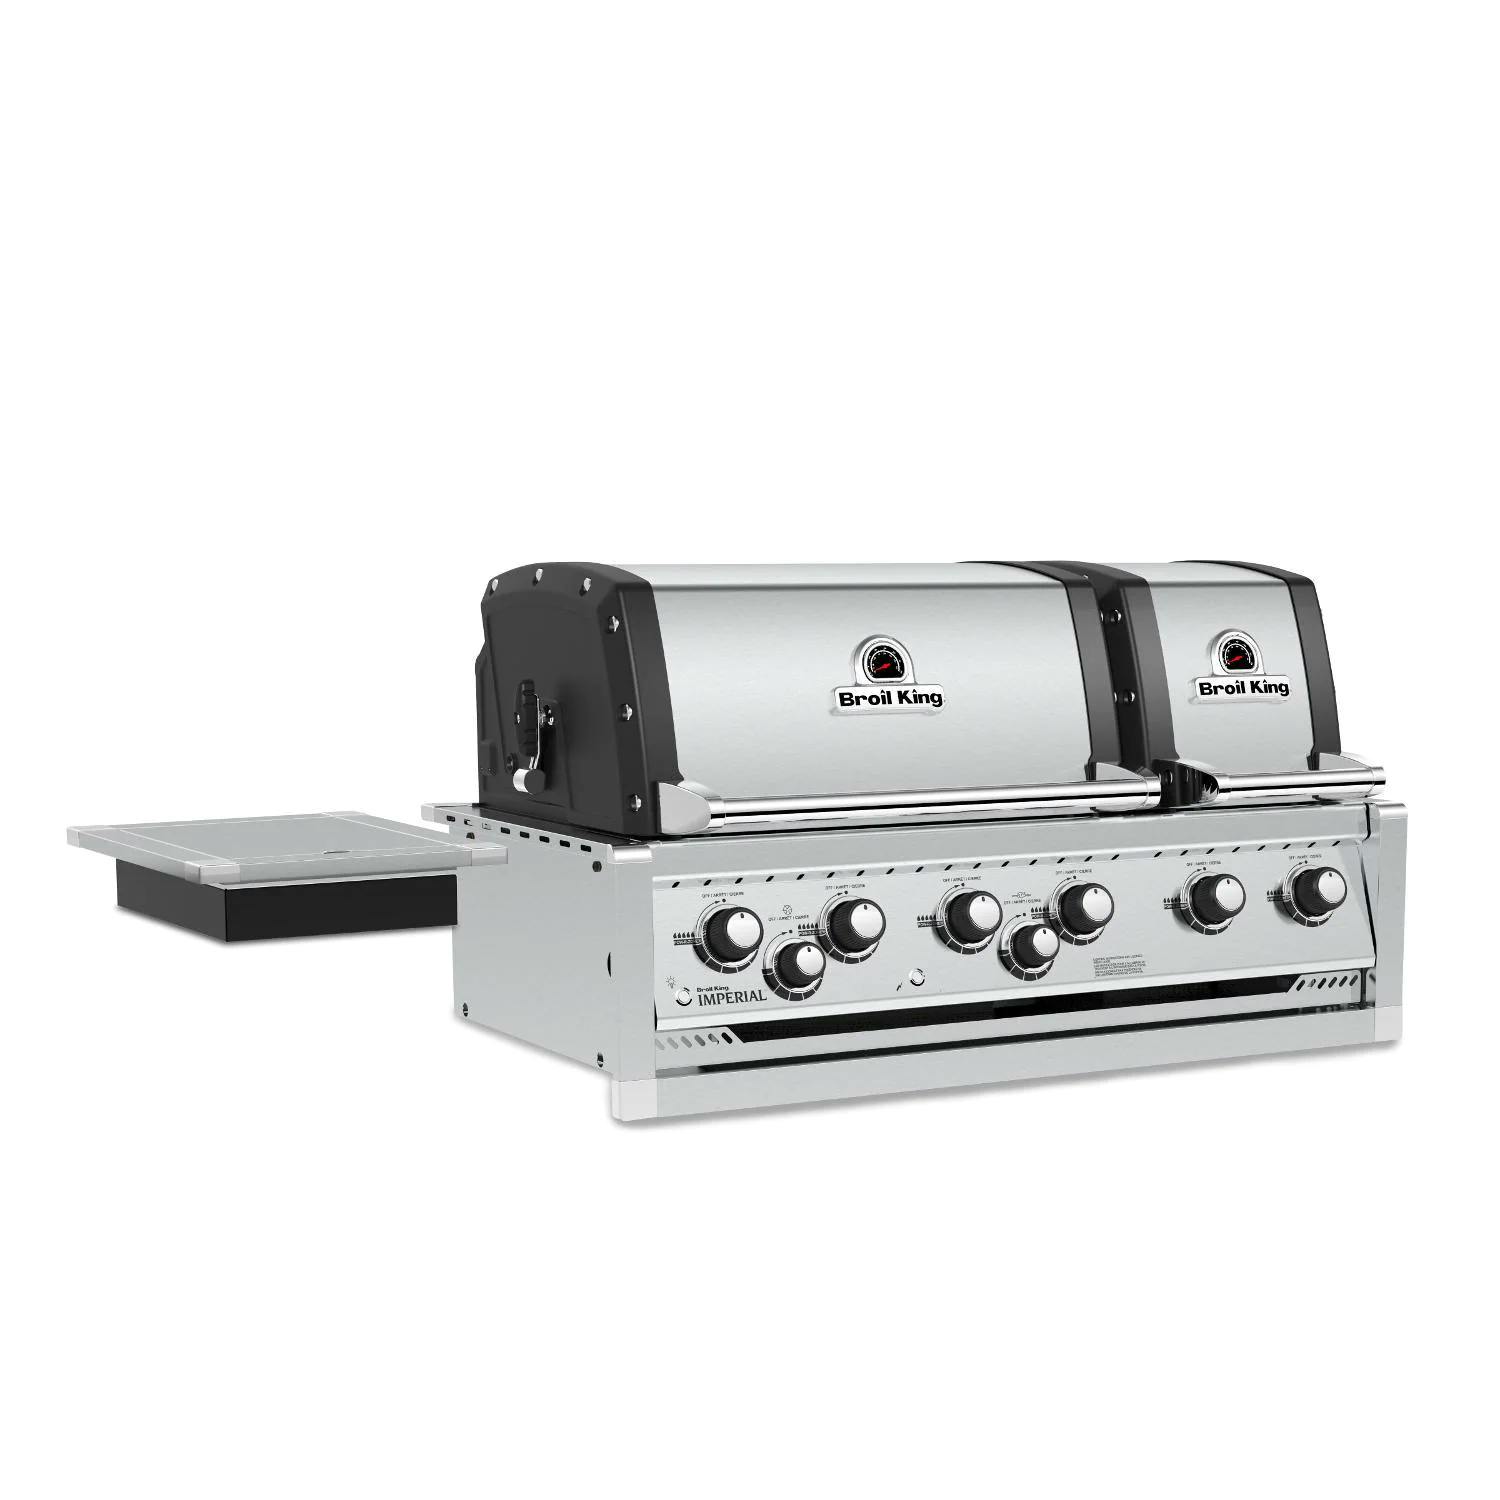 Broil King Imperial S Built-in Gas Grill with Rotisserie & Side Burner